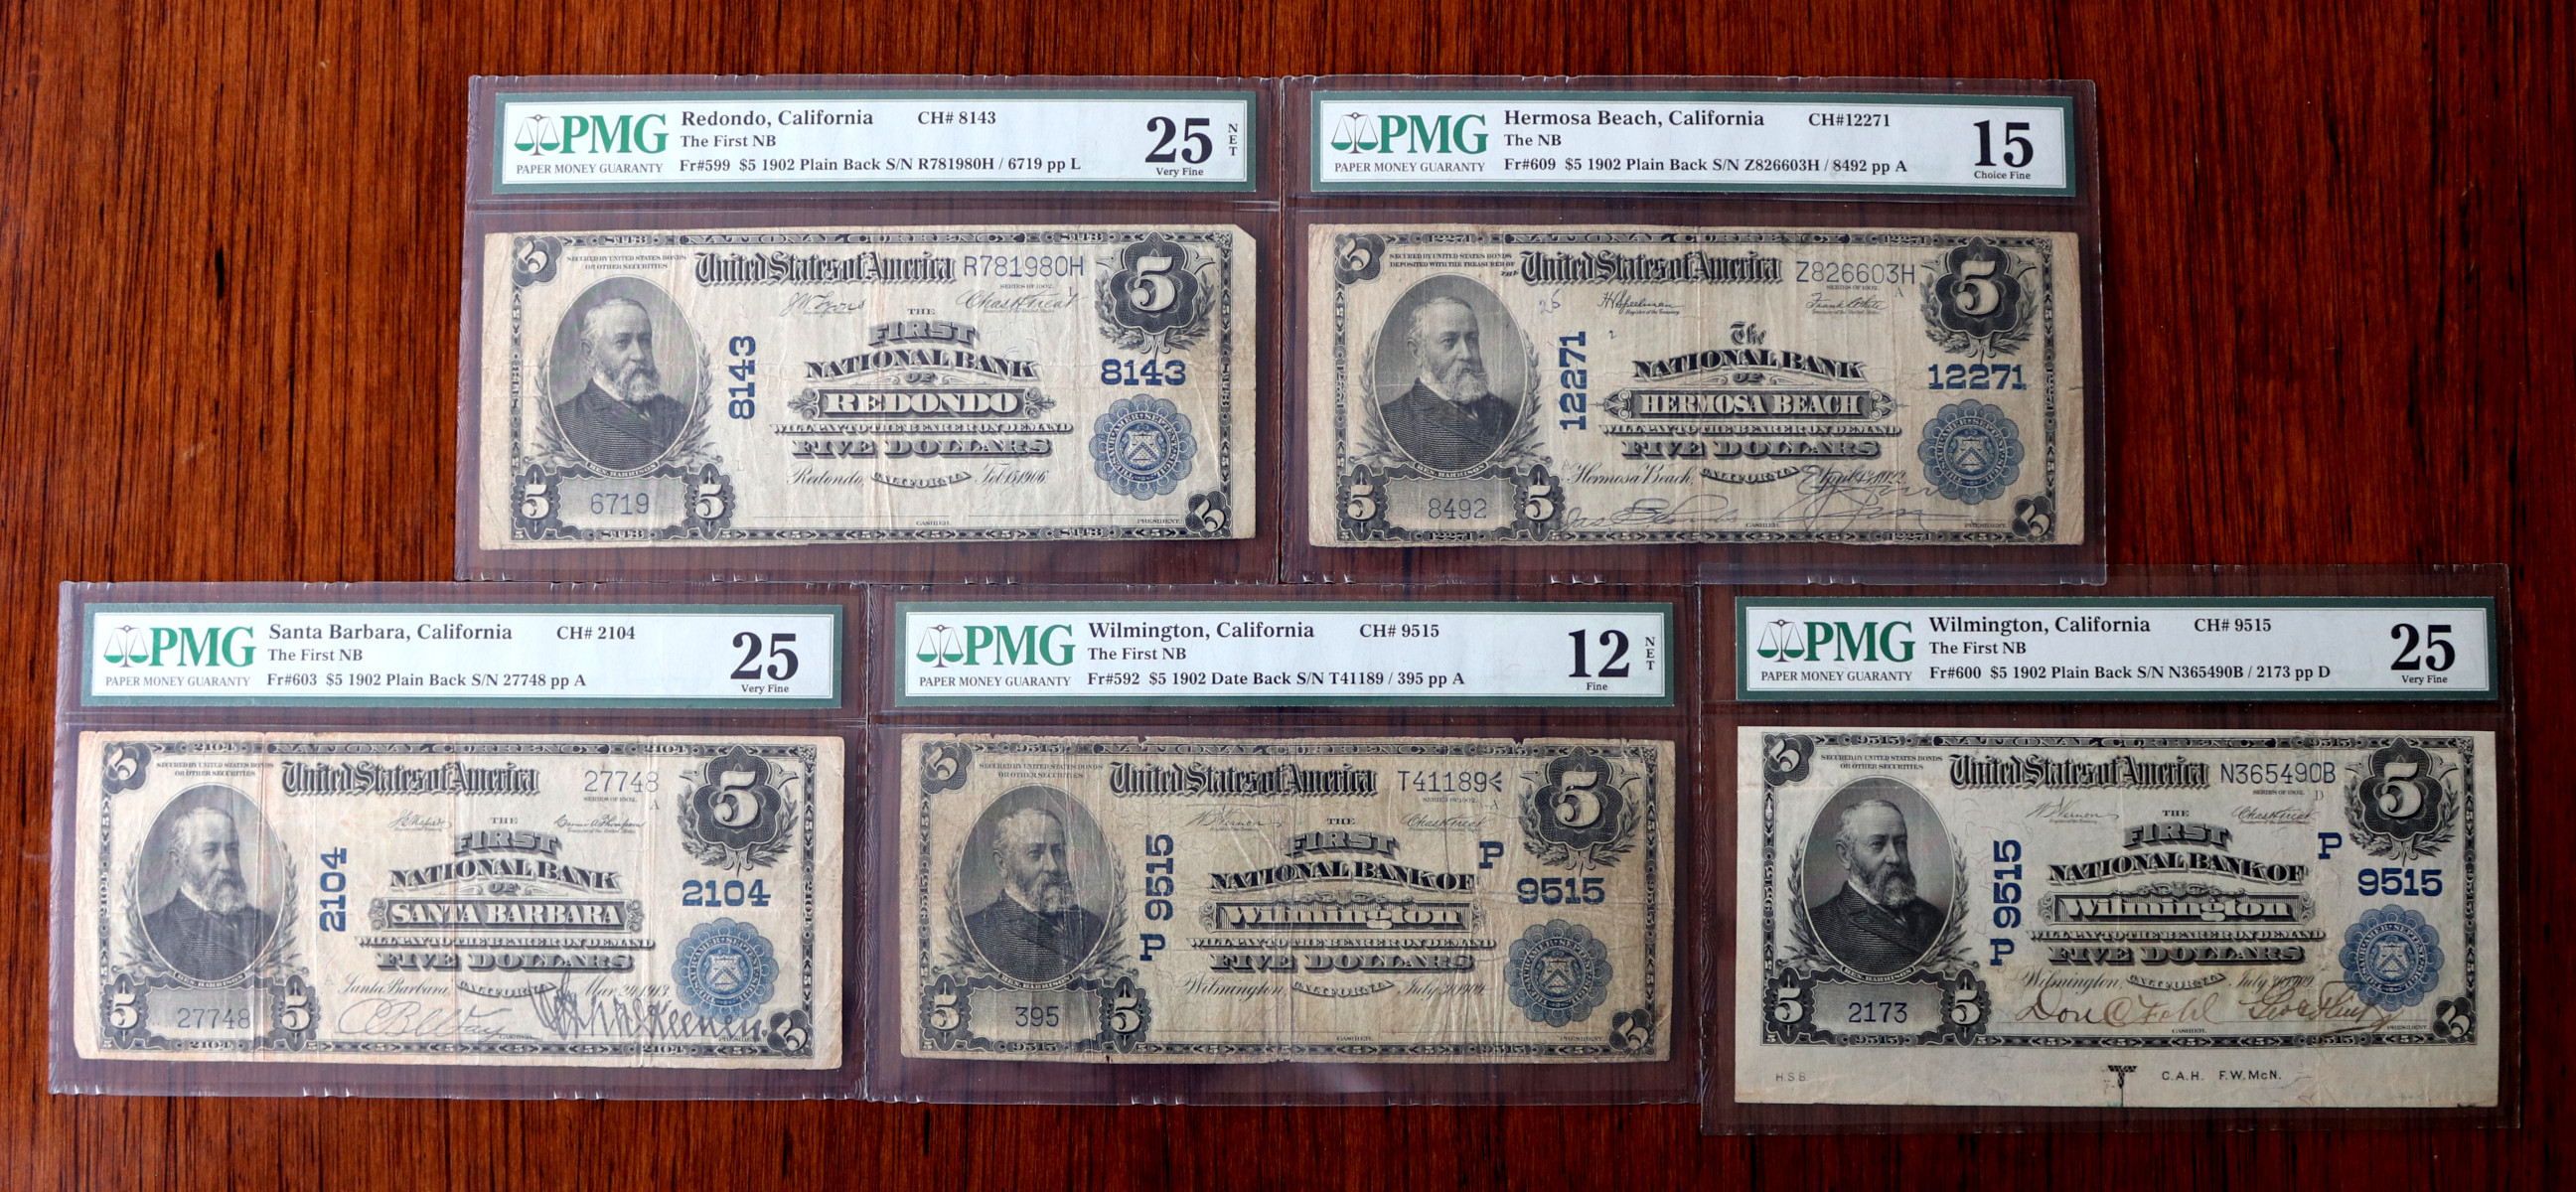 5 Five Dollar Notes from the South Bay Collection offered by Palos Verdes Coin Exchange, including Redondo Beach, Hermosa Beach, Santa Barbara, and two from Wilmington